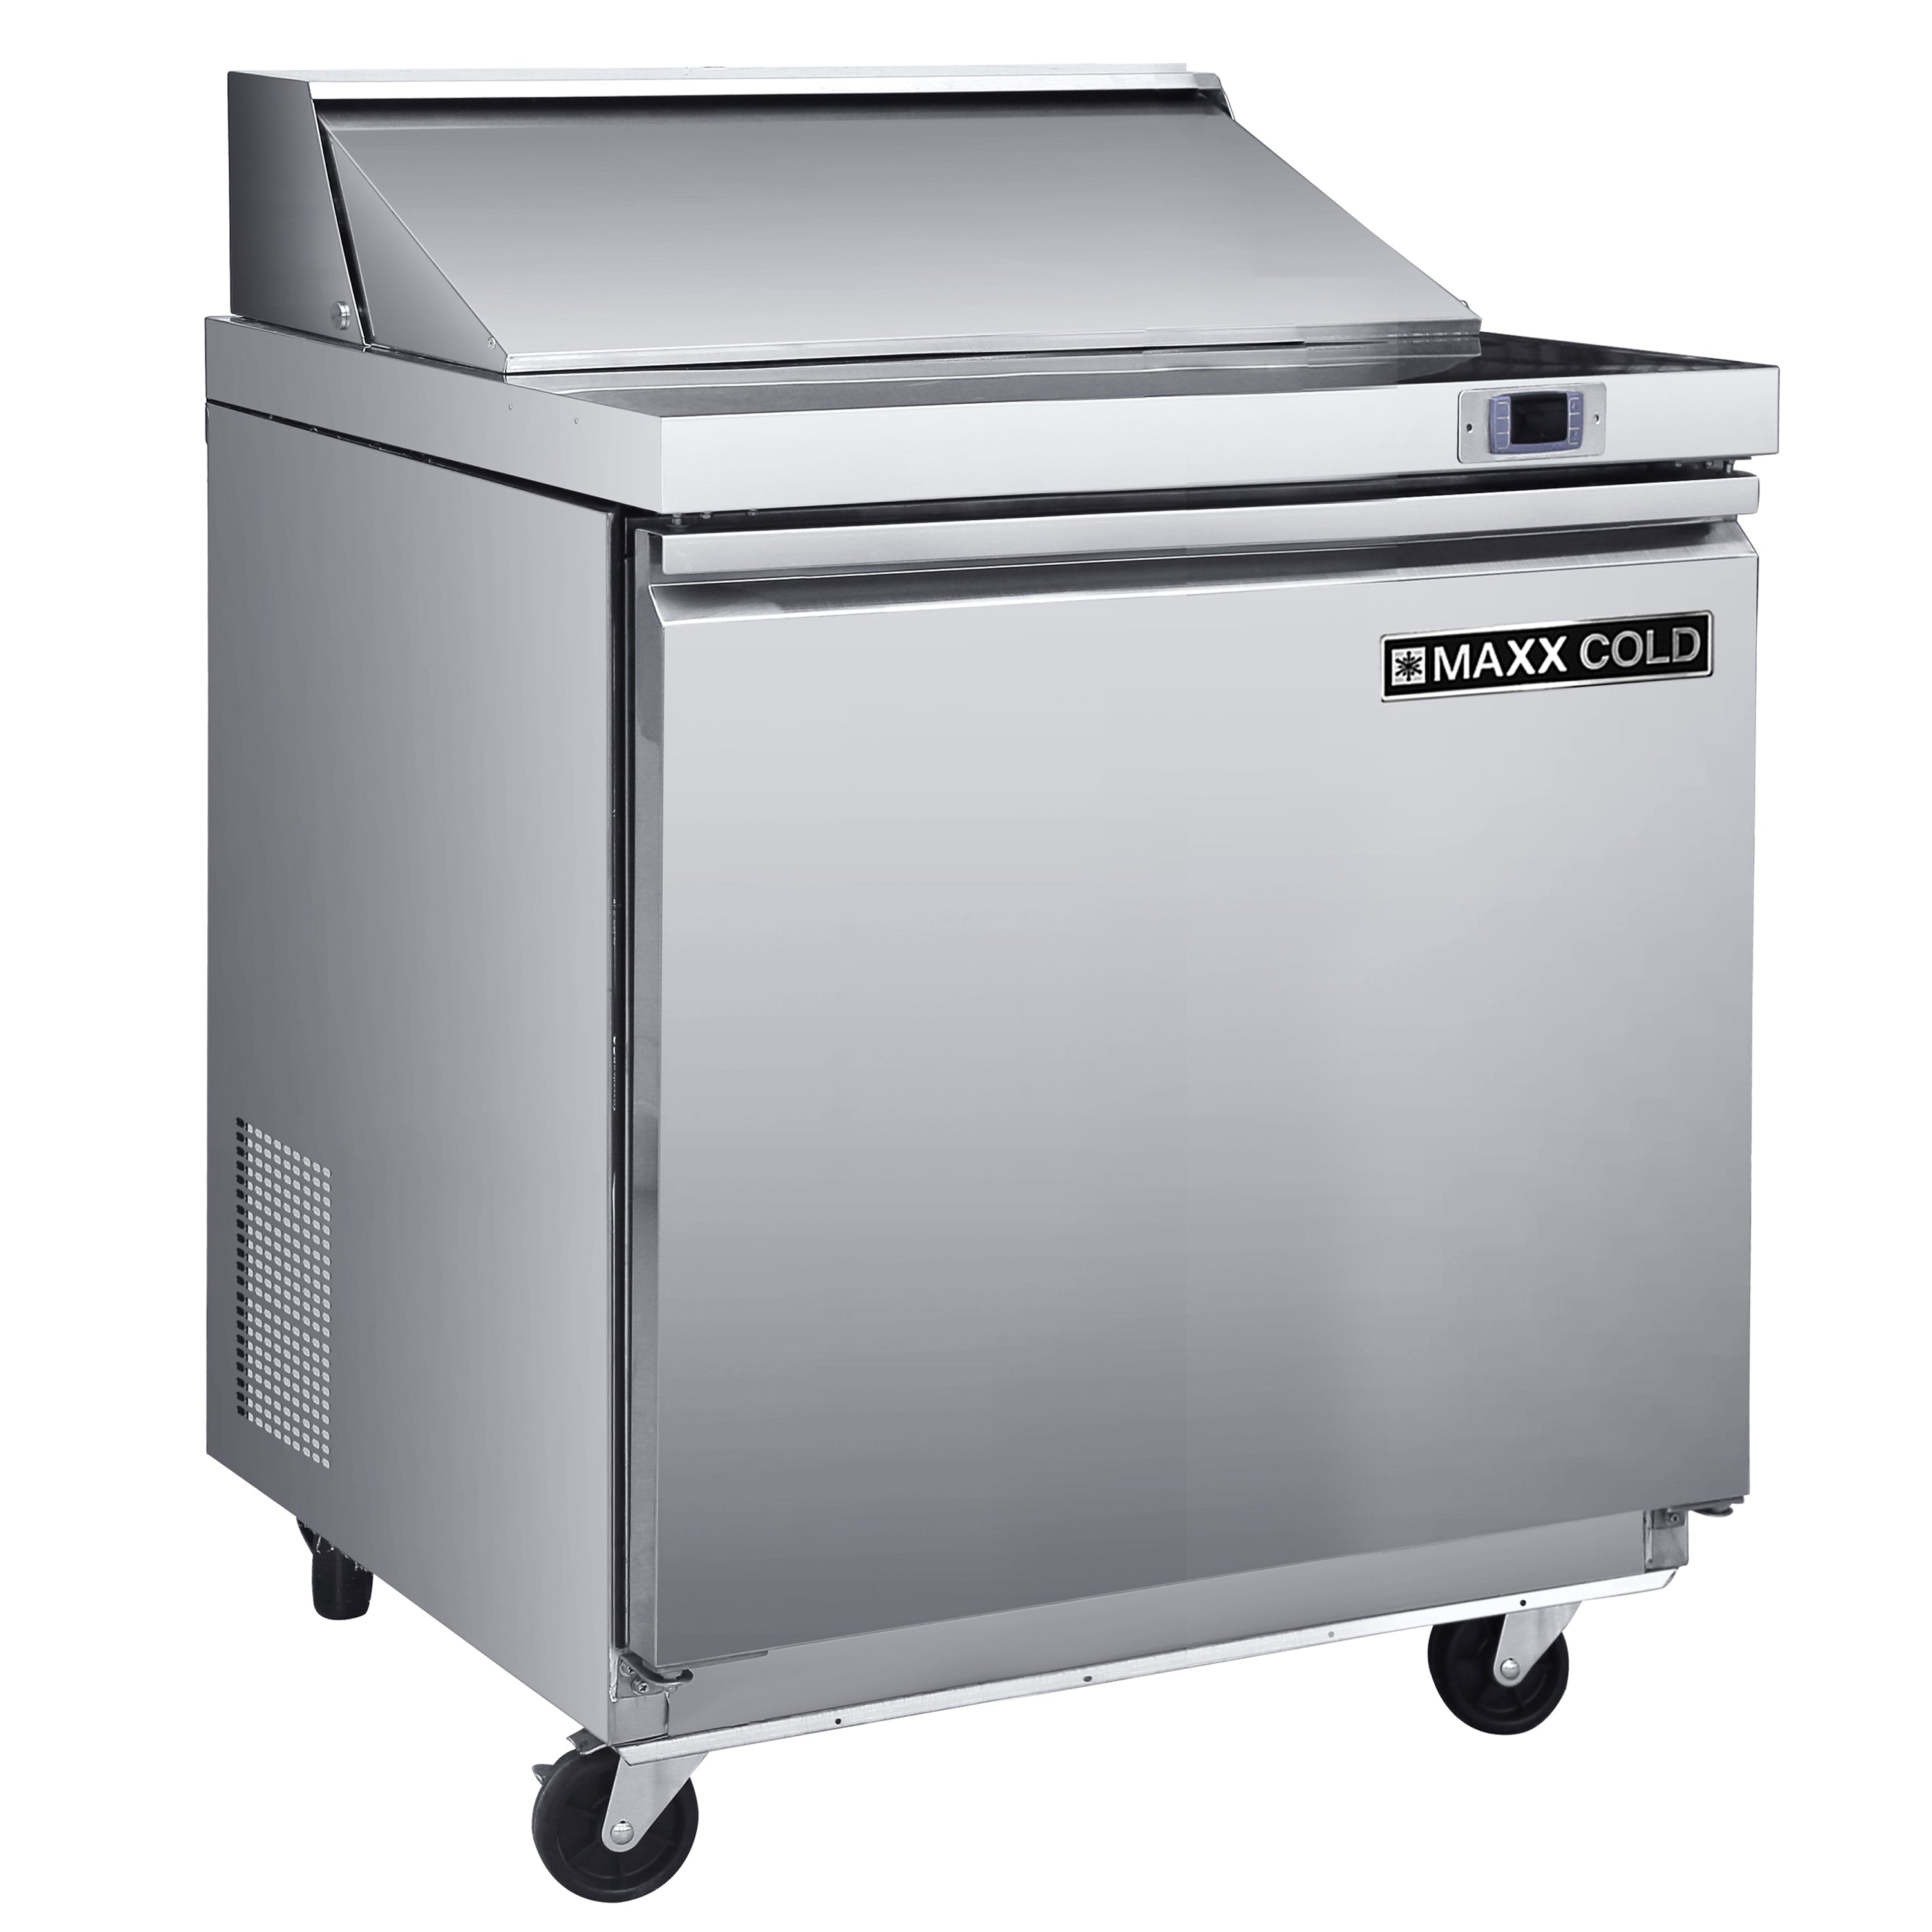 Maxx Cold - MXSR29SHC, Maxx Cold One-Door Refrigerated Sandwich and Salad Prep Station, 29"W, 7.59 cu, ft. Storage Capacity, Equipped with (4) 4" Deep Pans and Cutting Board, in Stainless Steel